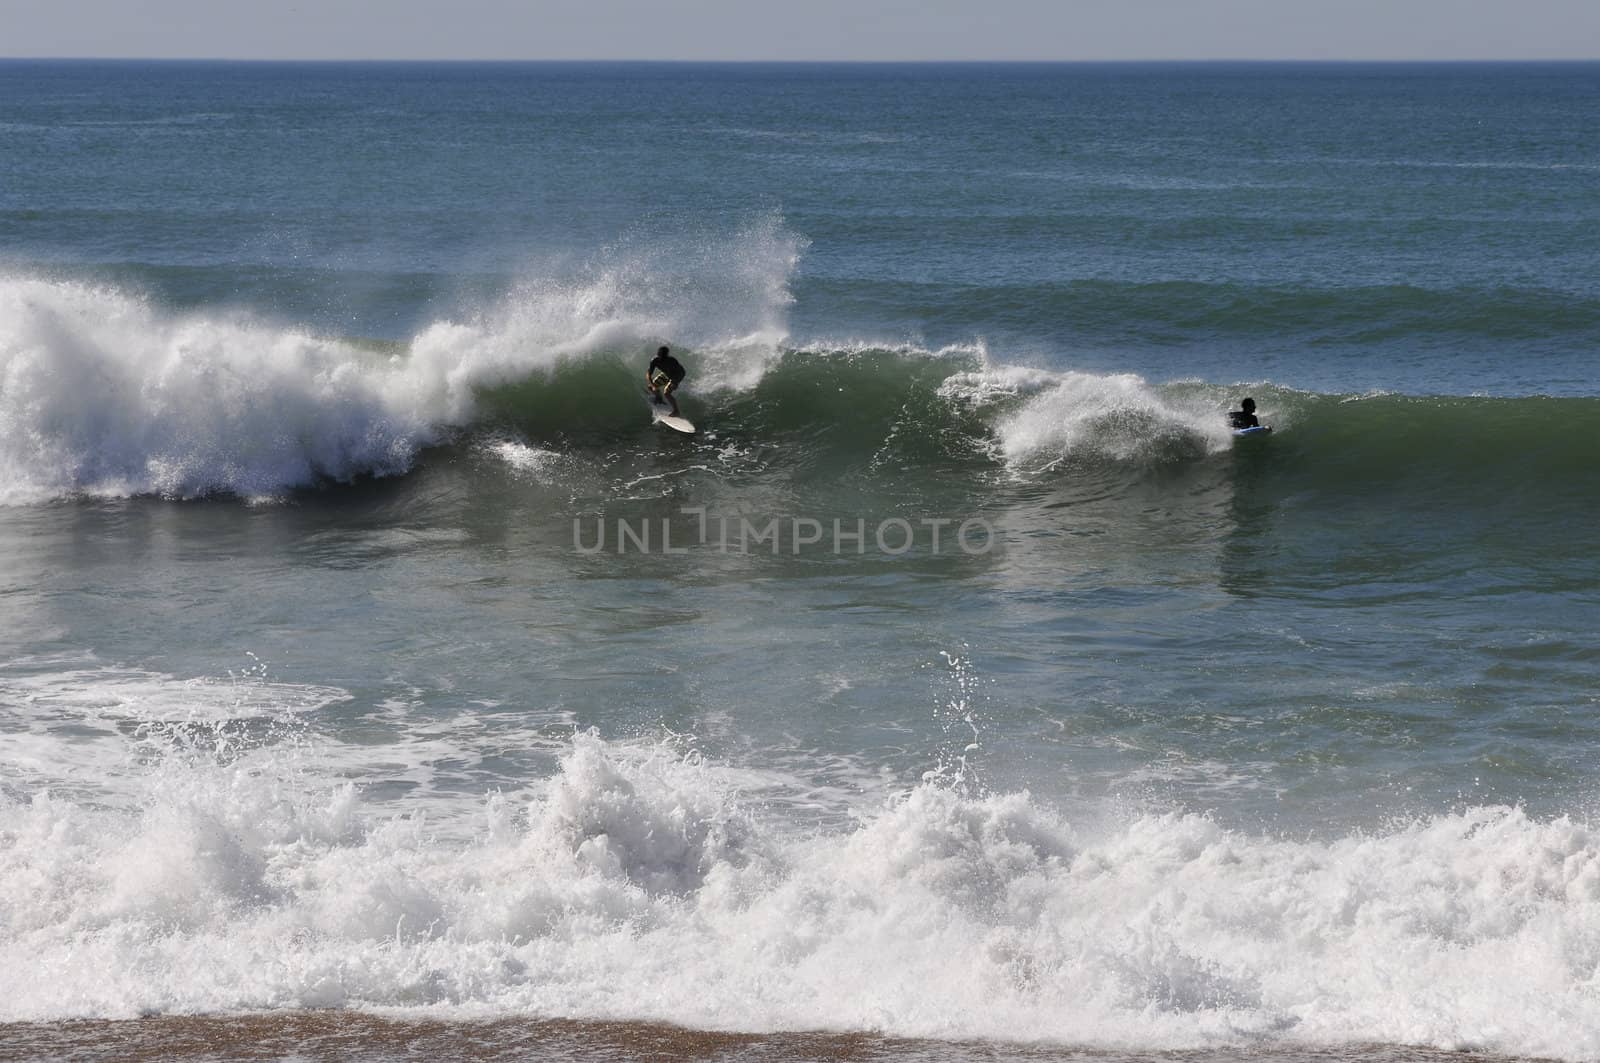 Two surfers on a wave during a nice day